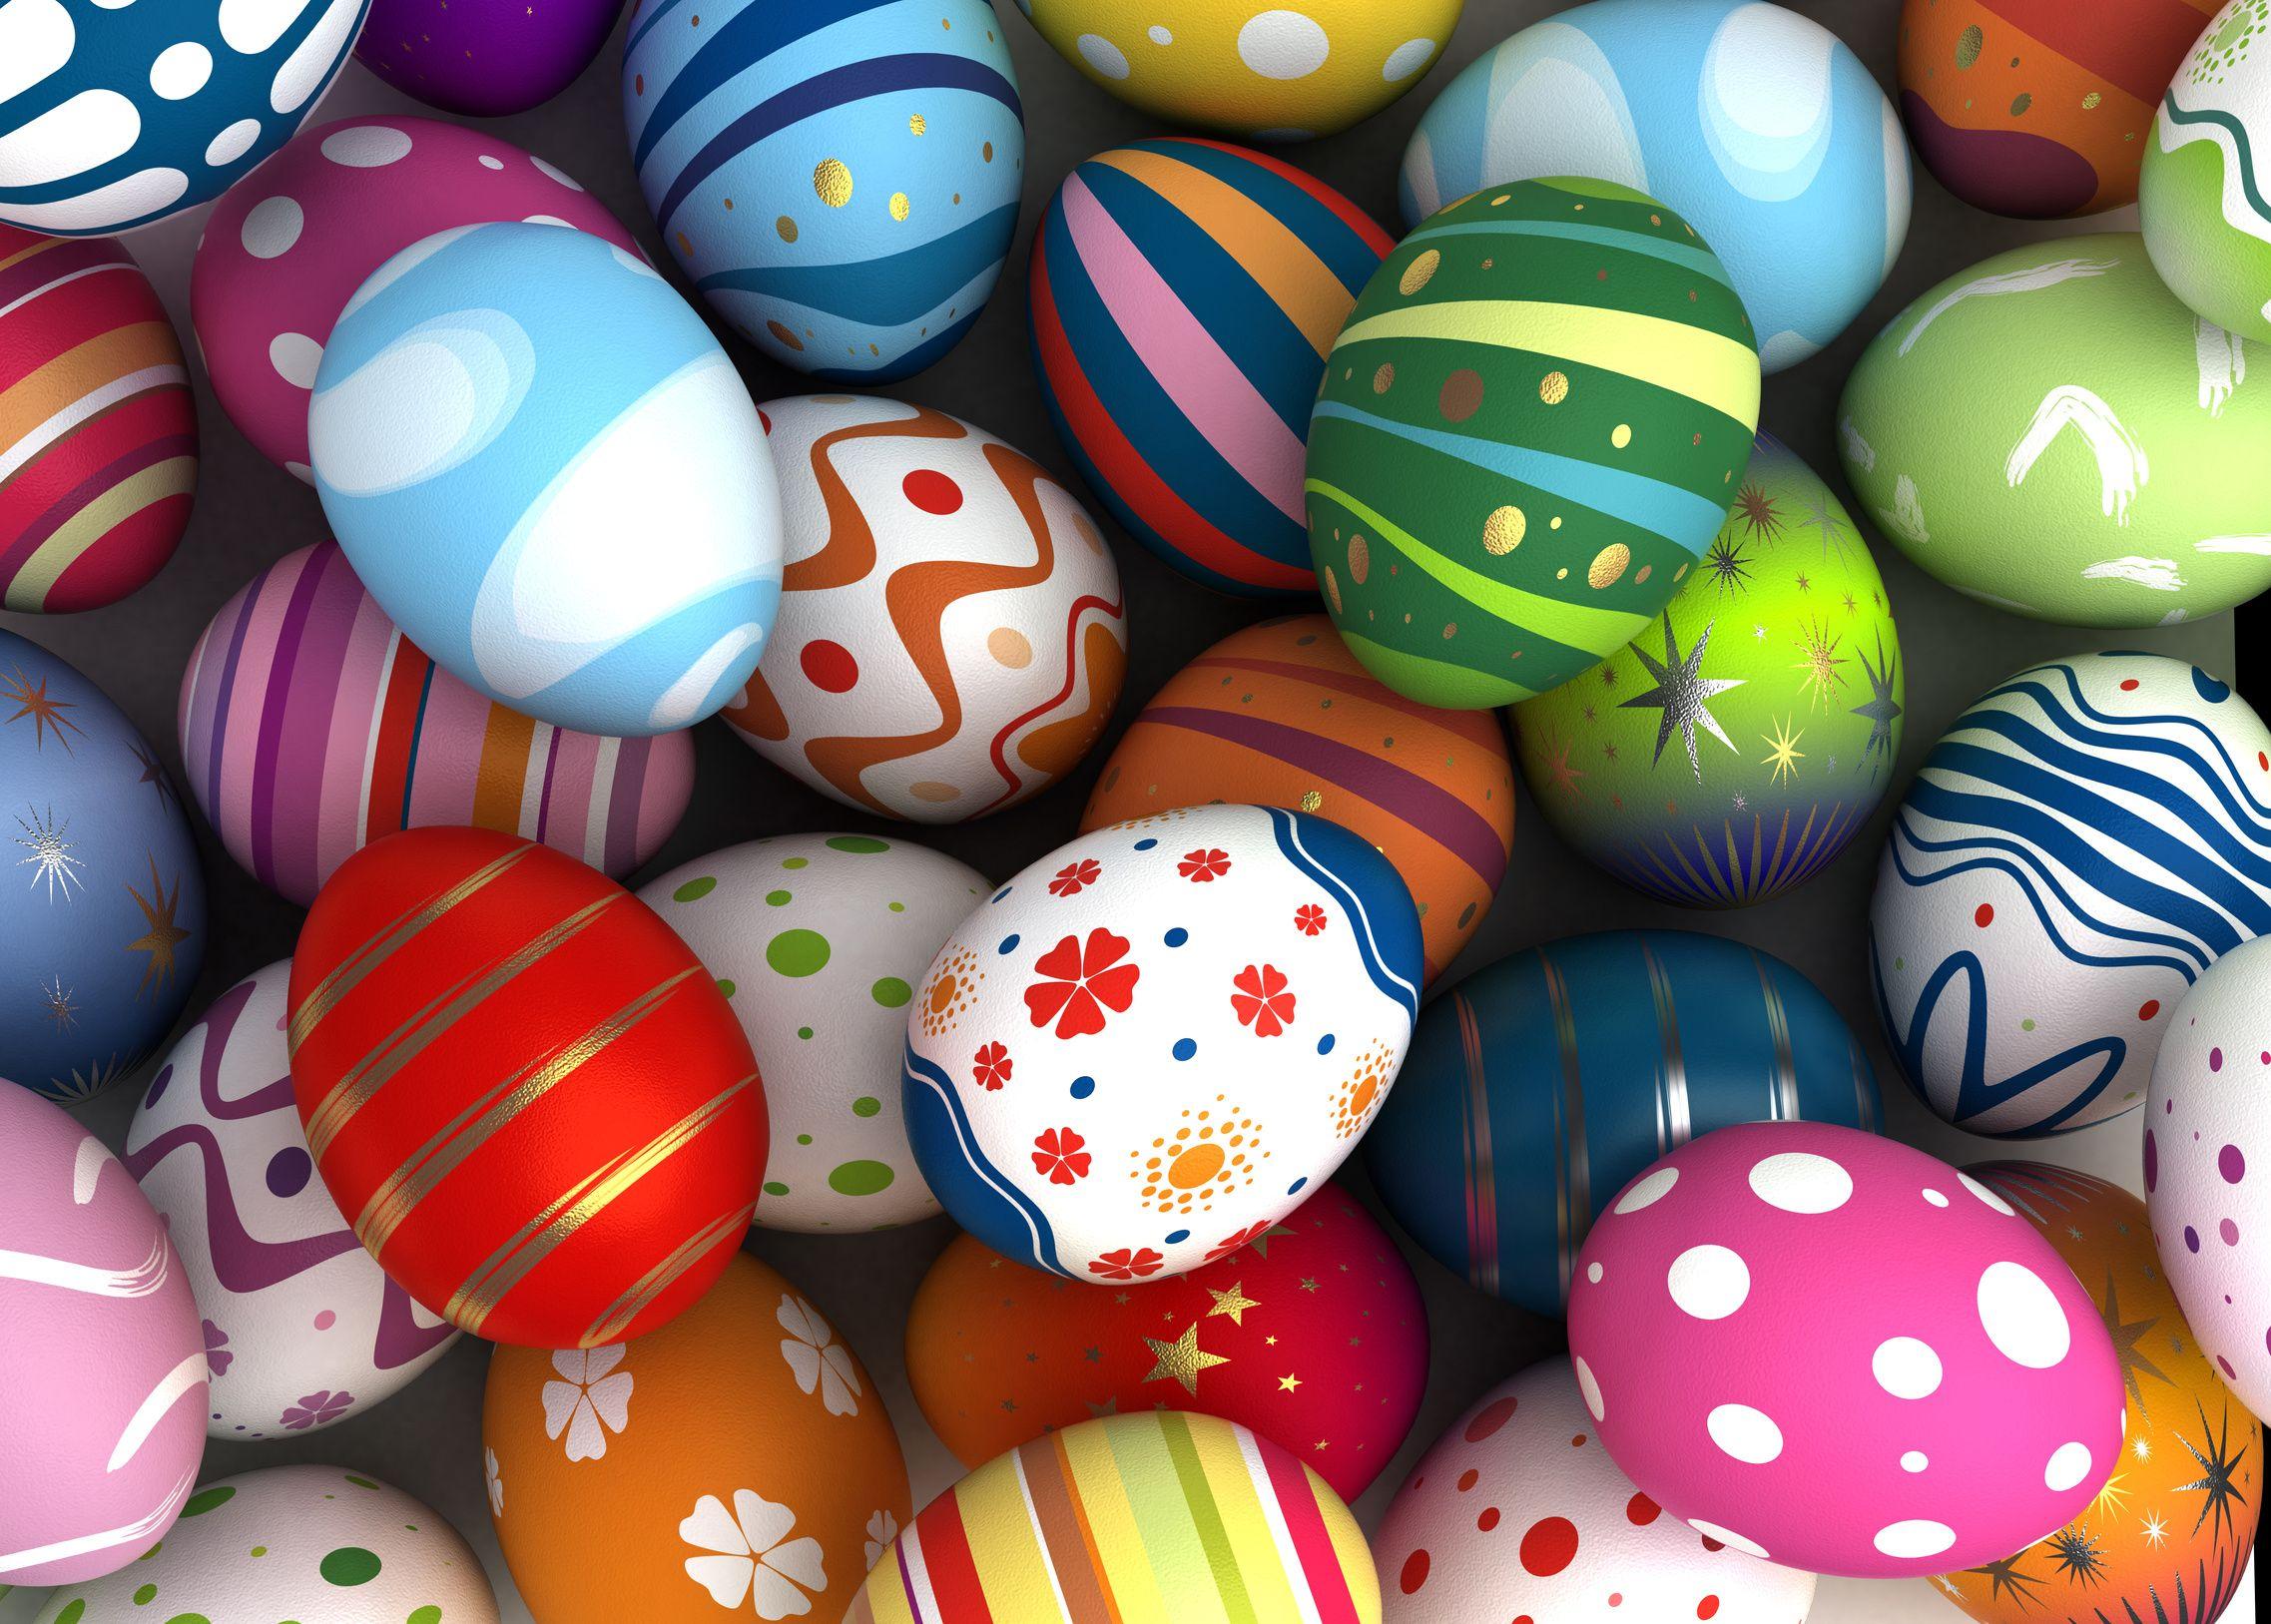 Colorful Easter Eggs 28239 2275x1627 px